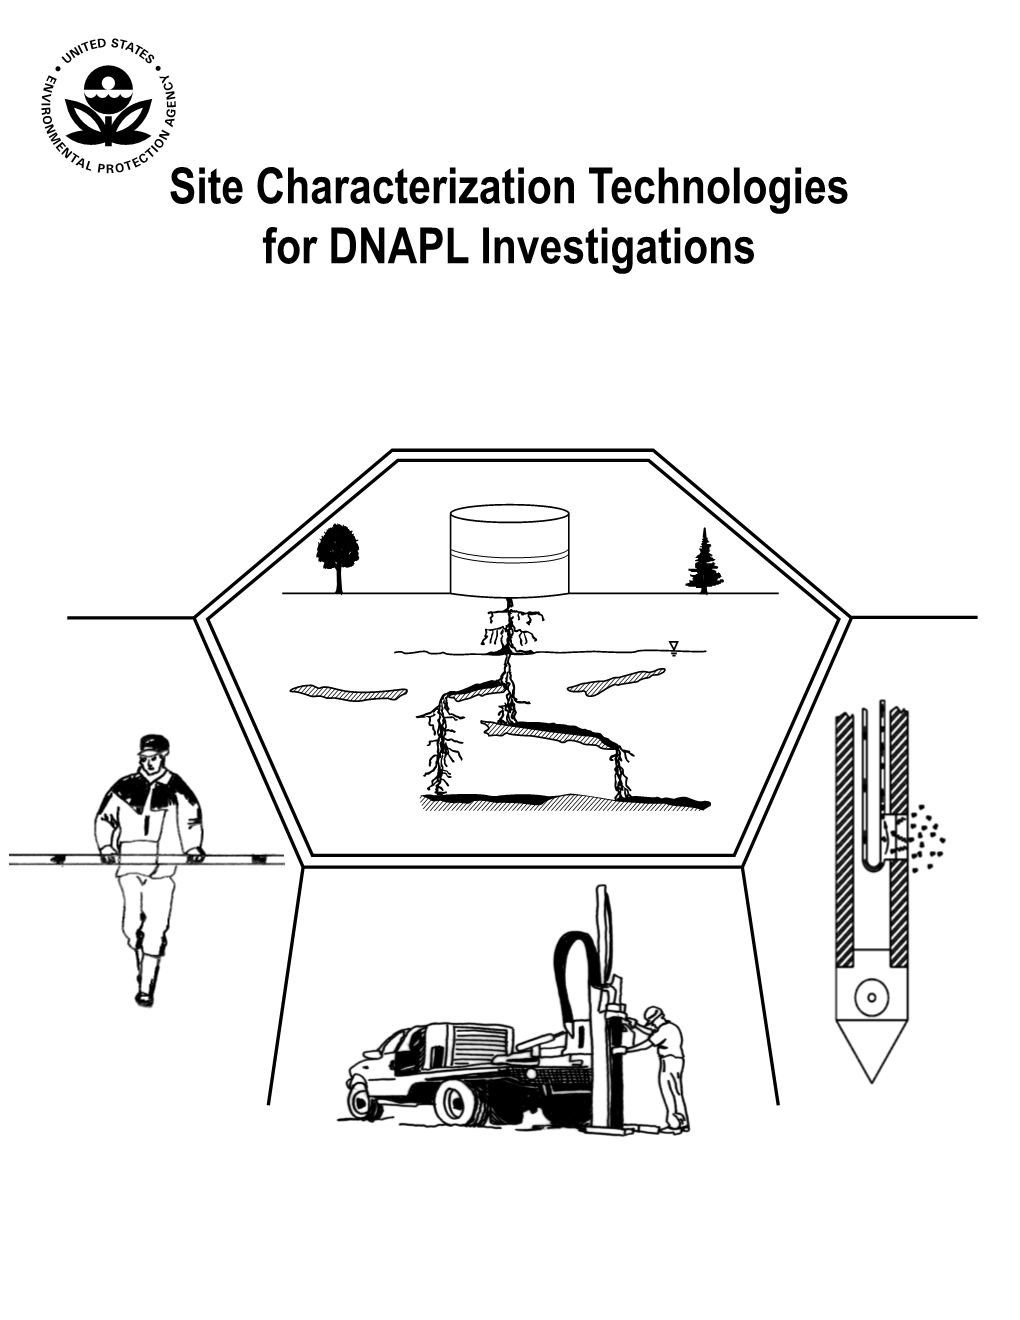 Site Characterization Technologies for DNAPL Investigations, EPA 542-R-04-017